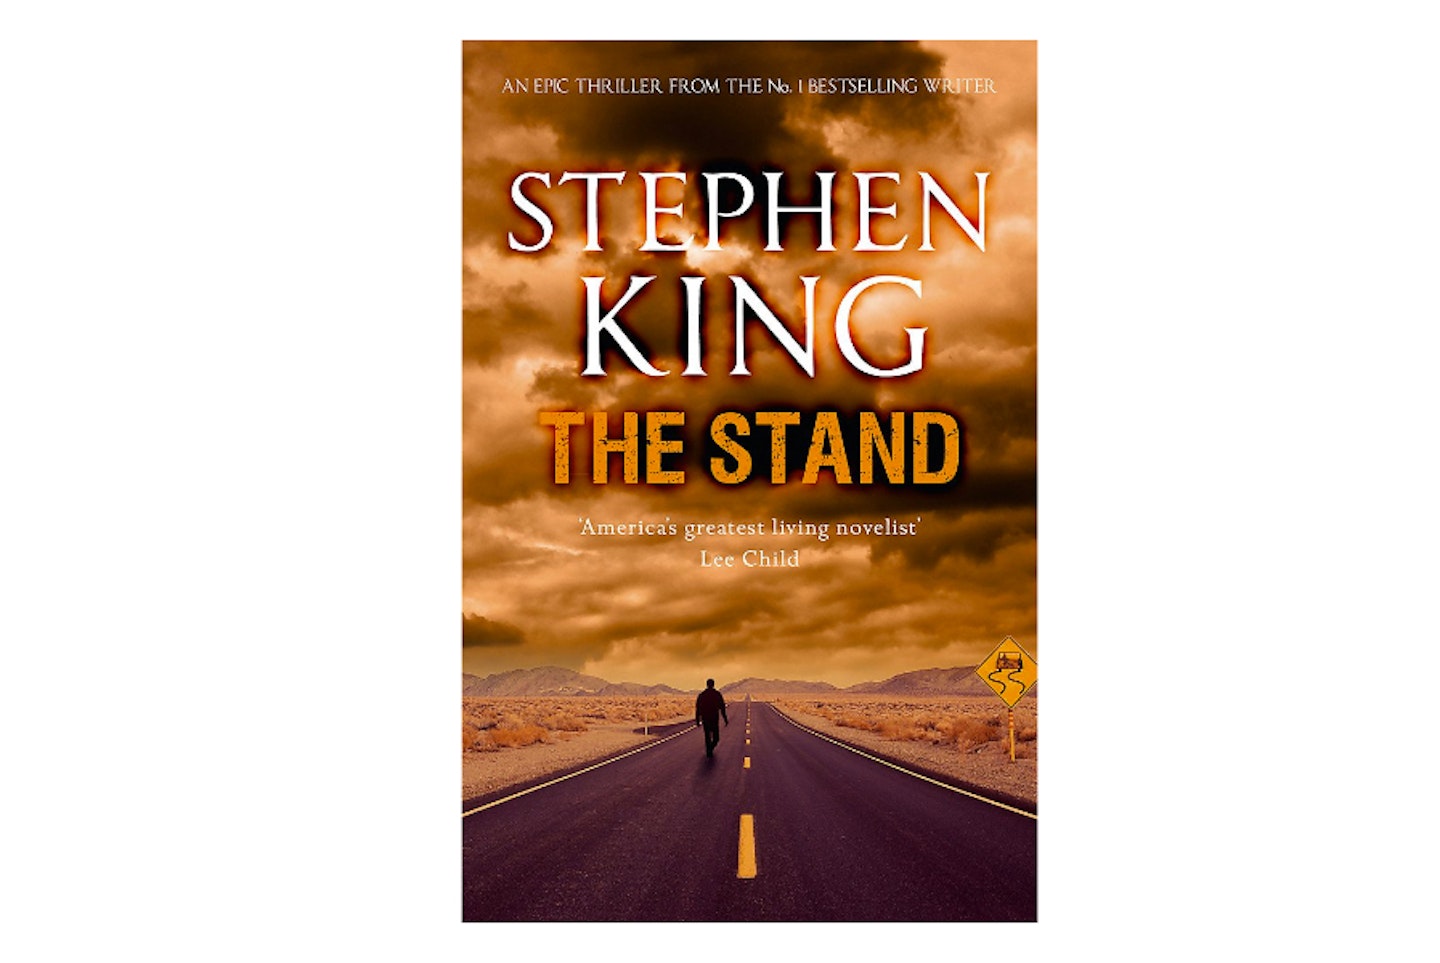 The Stand by Stephen King